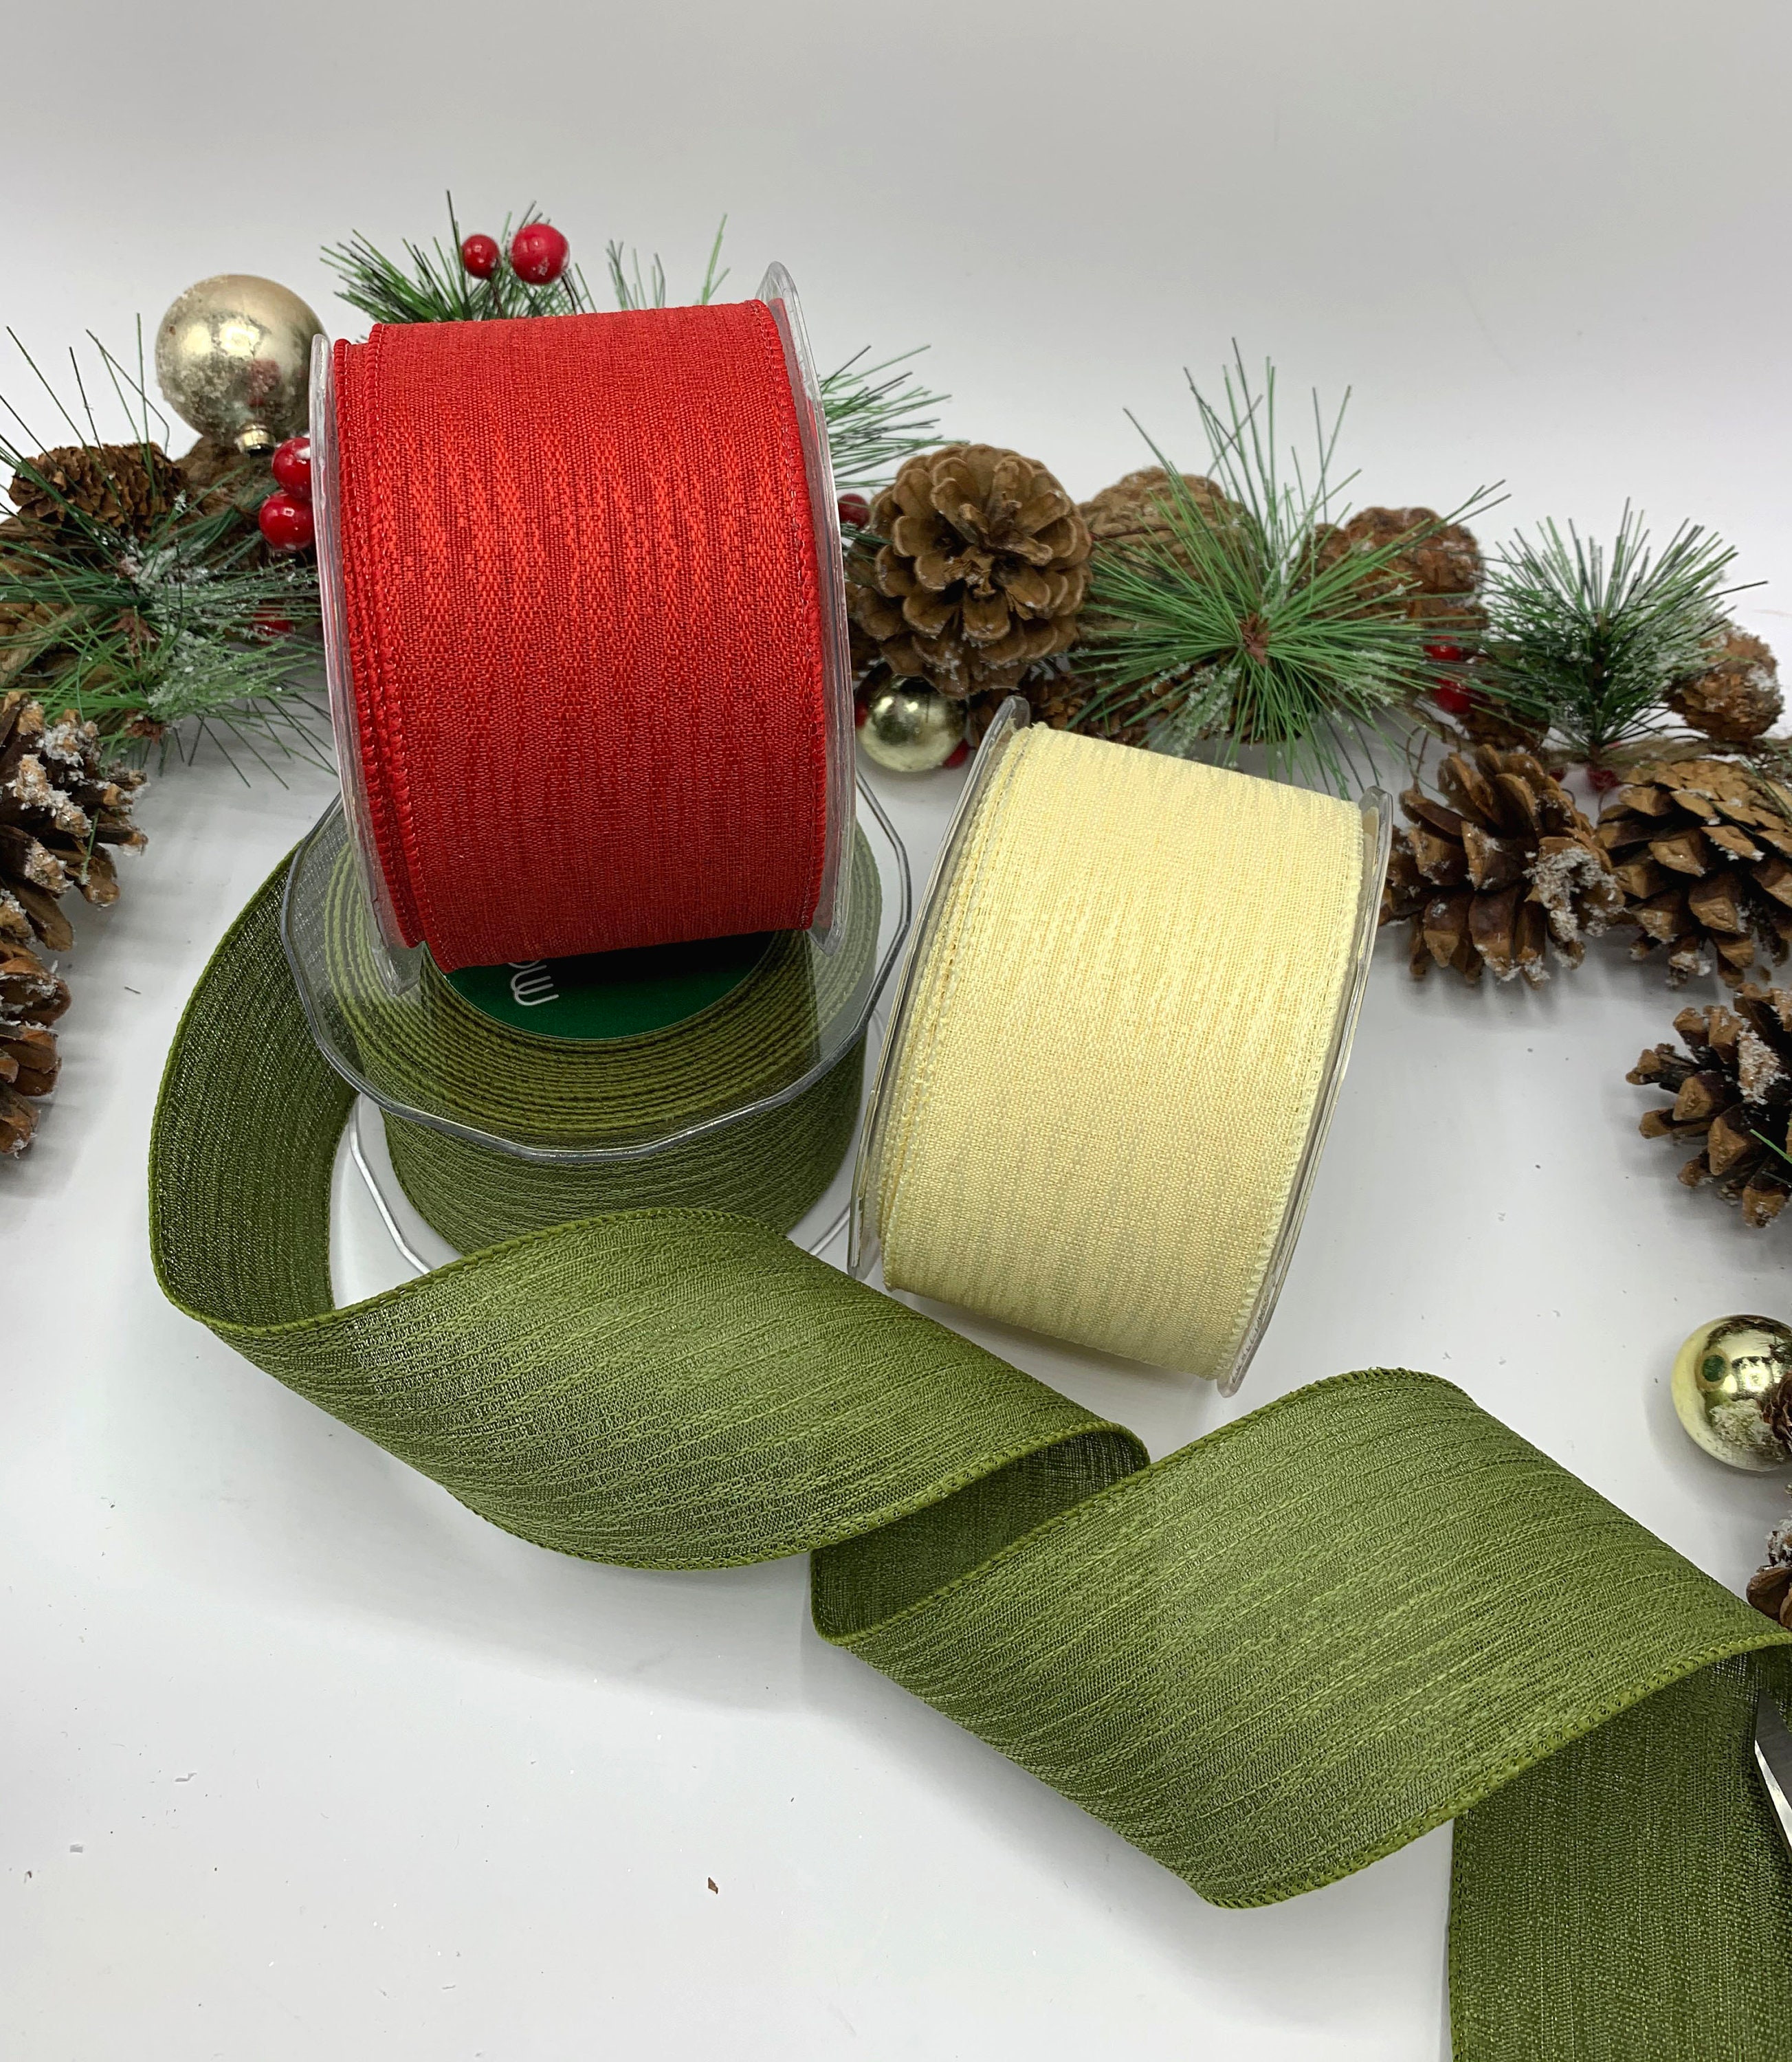 Ribbon FESTIVE RED & GREEN 63mm x 2 meters Wired Ribbon Christmas 